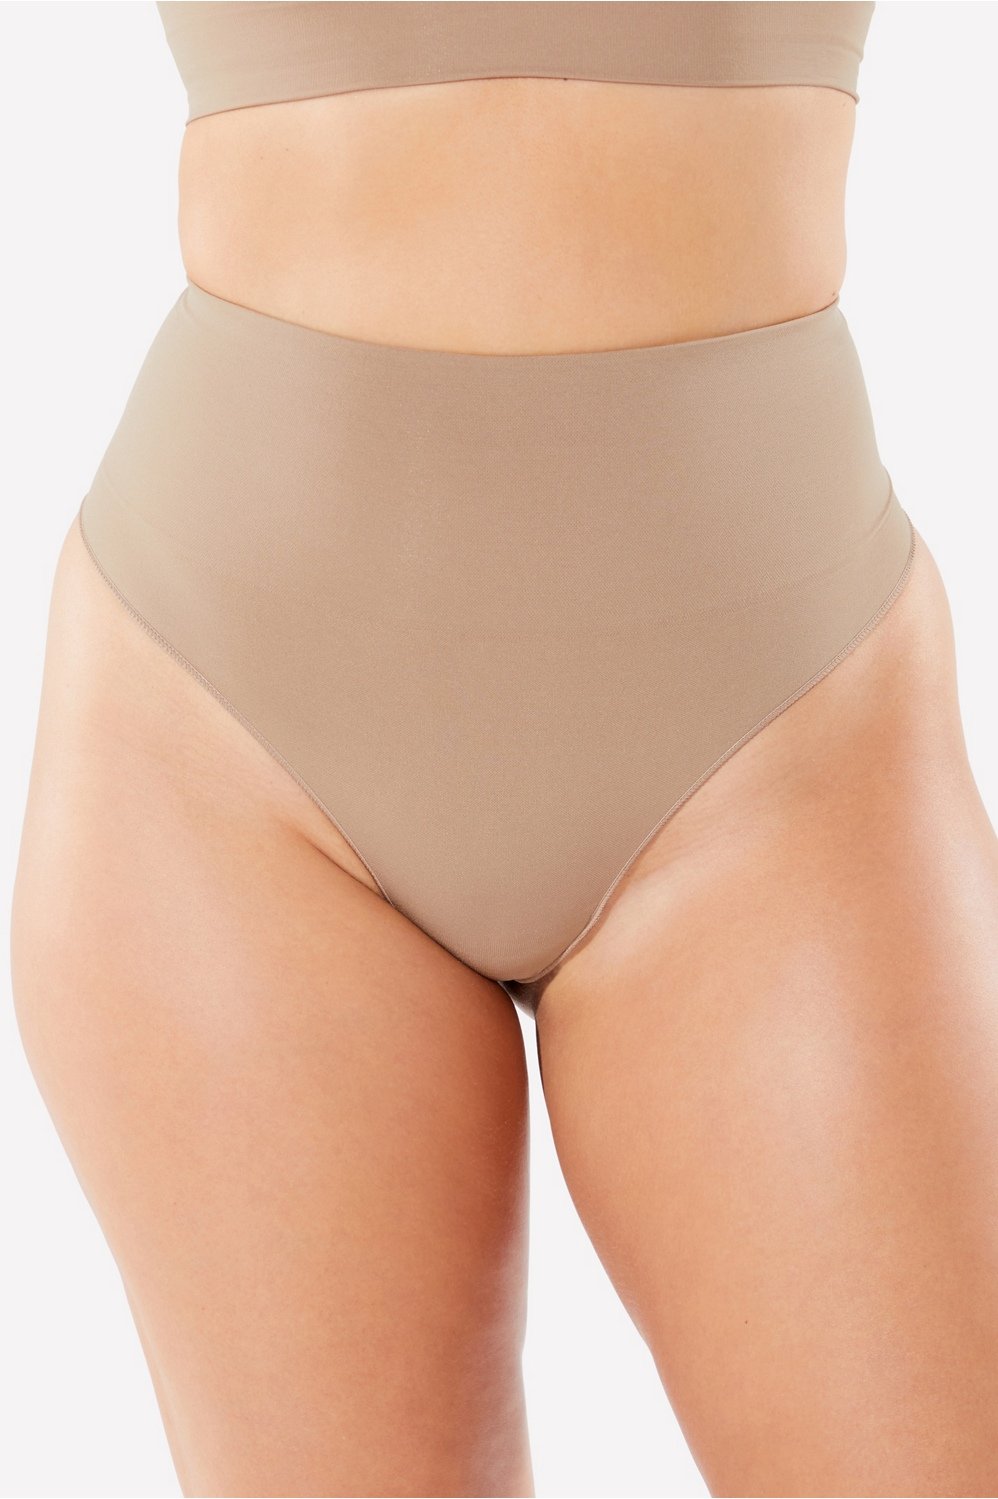 YITTY Nearly Naked Shaping High Waist Short, Moody Taupe, X-Small